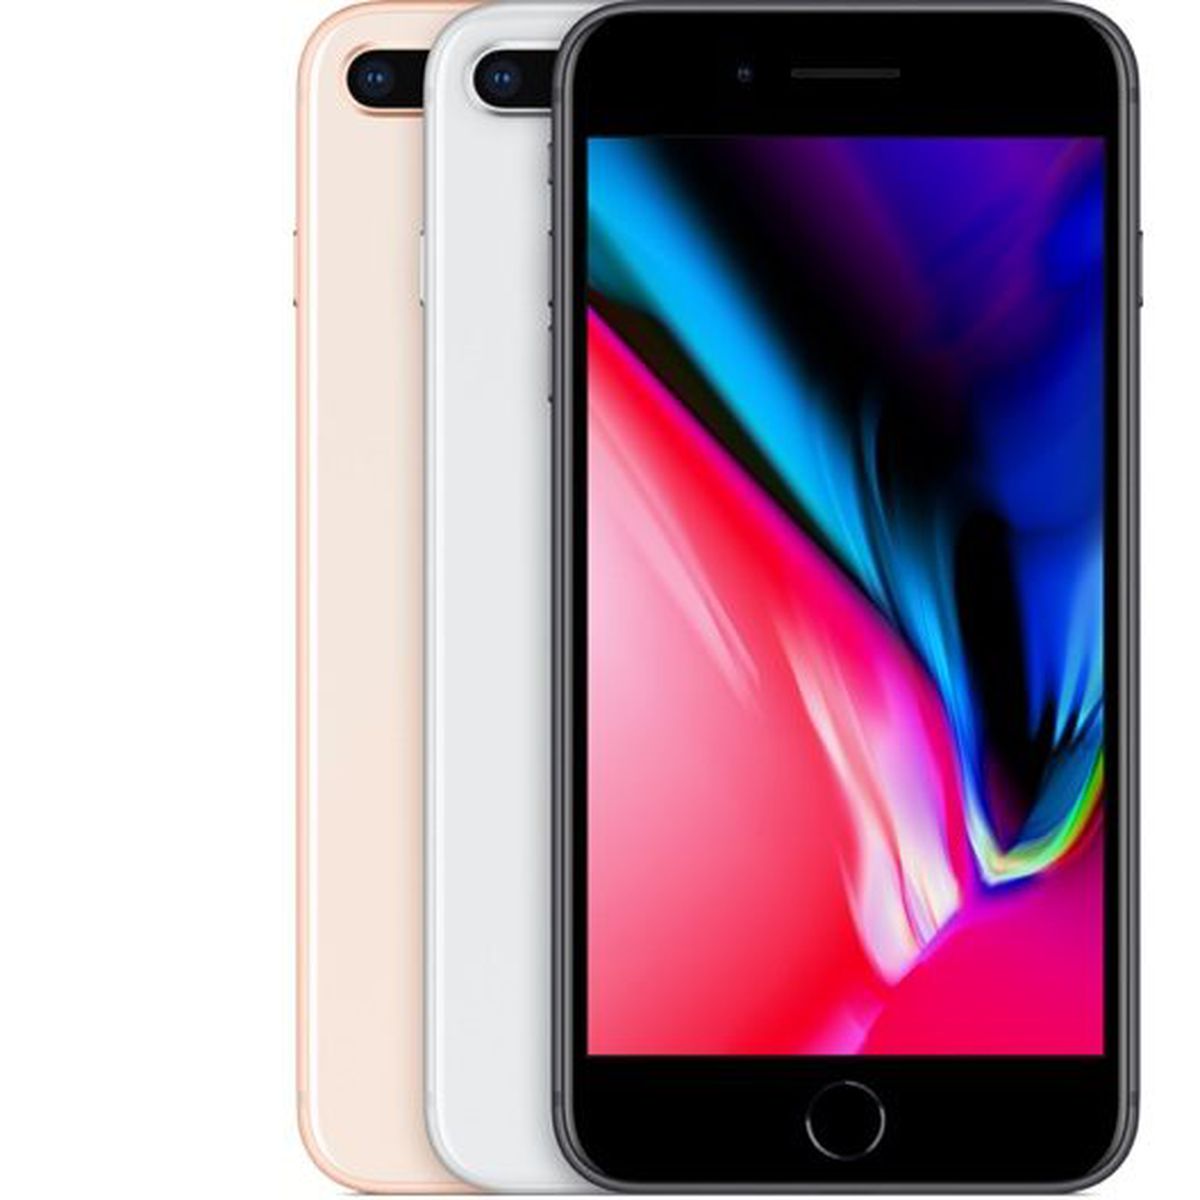 iPhone 8 and iPhone 8 Plus Now Available for Pre-Order - MacRumors